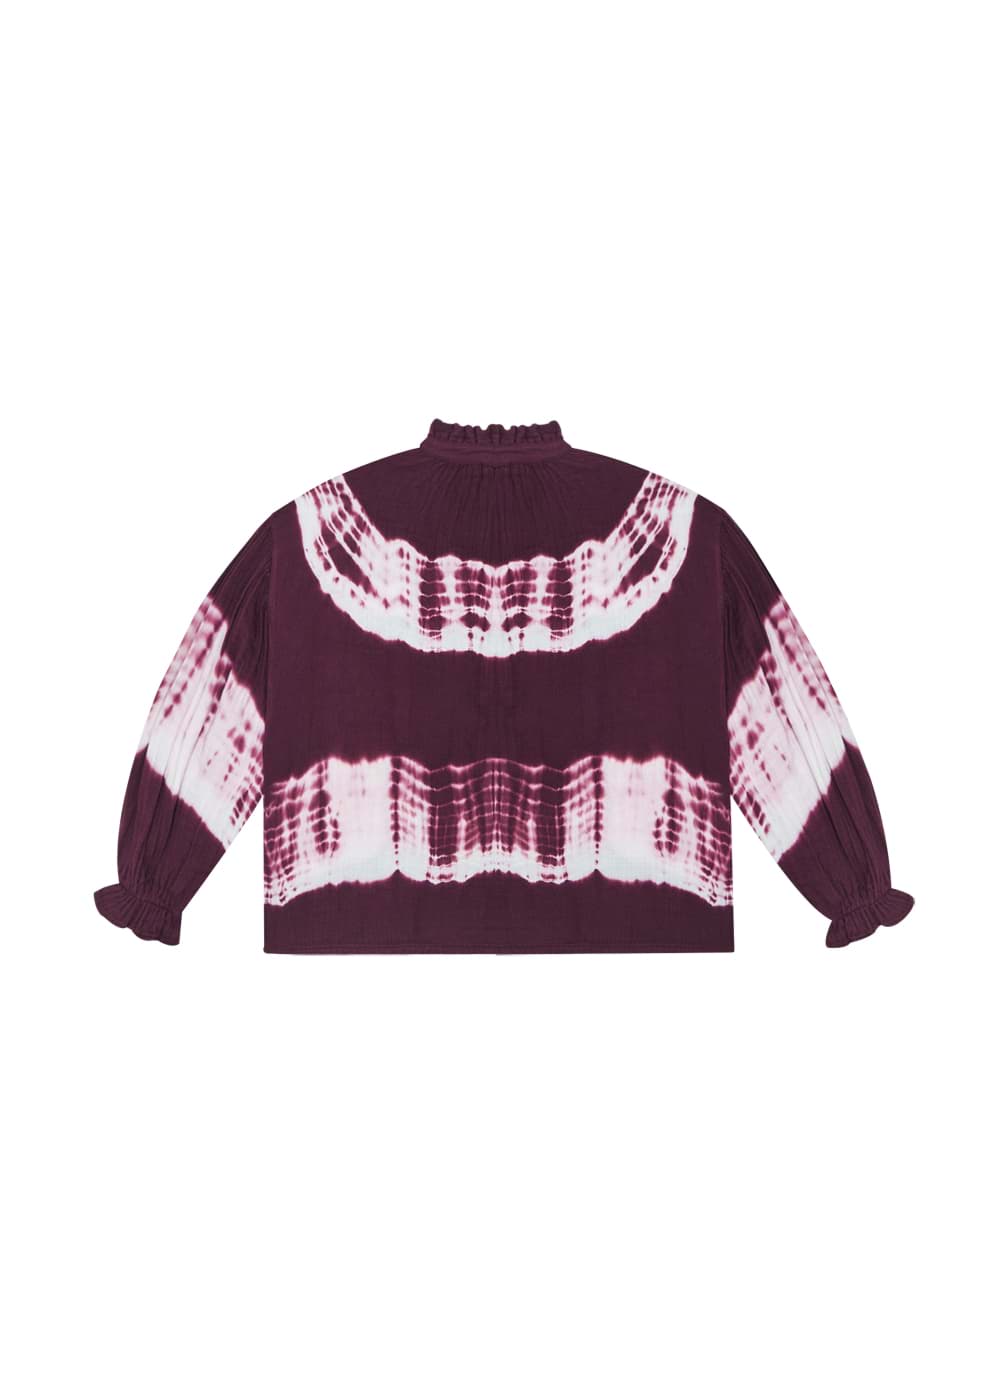 Picture of OLIVIA BLOUSE - TIE DYE PLUM WINE